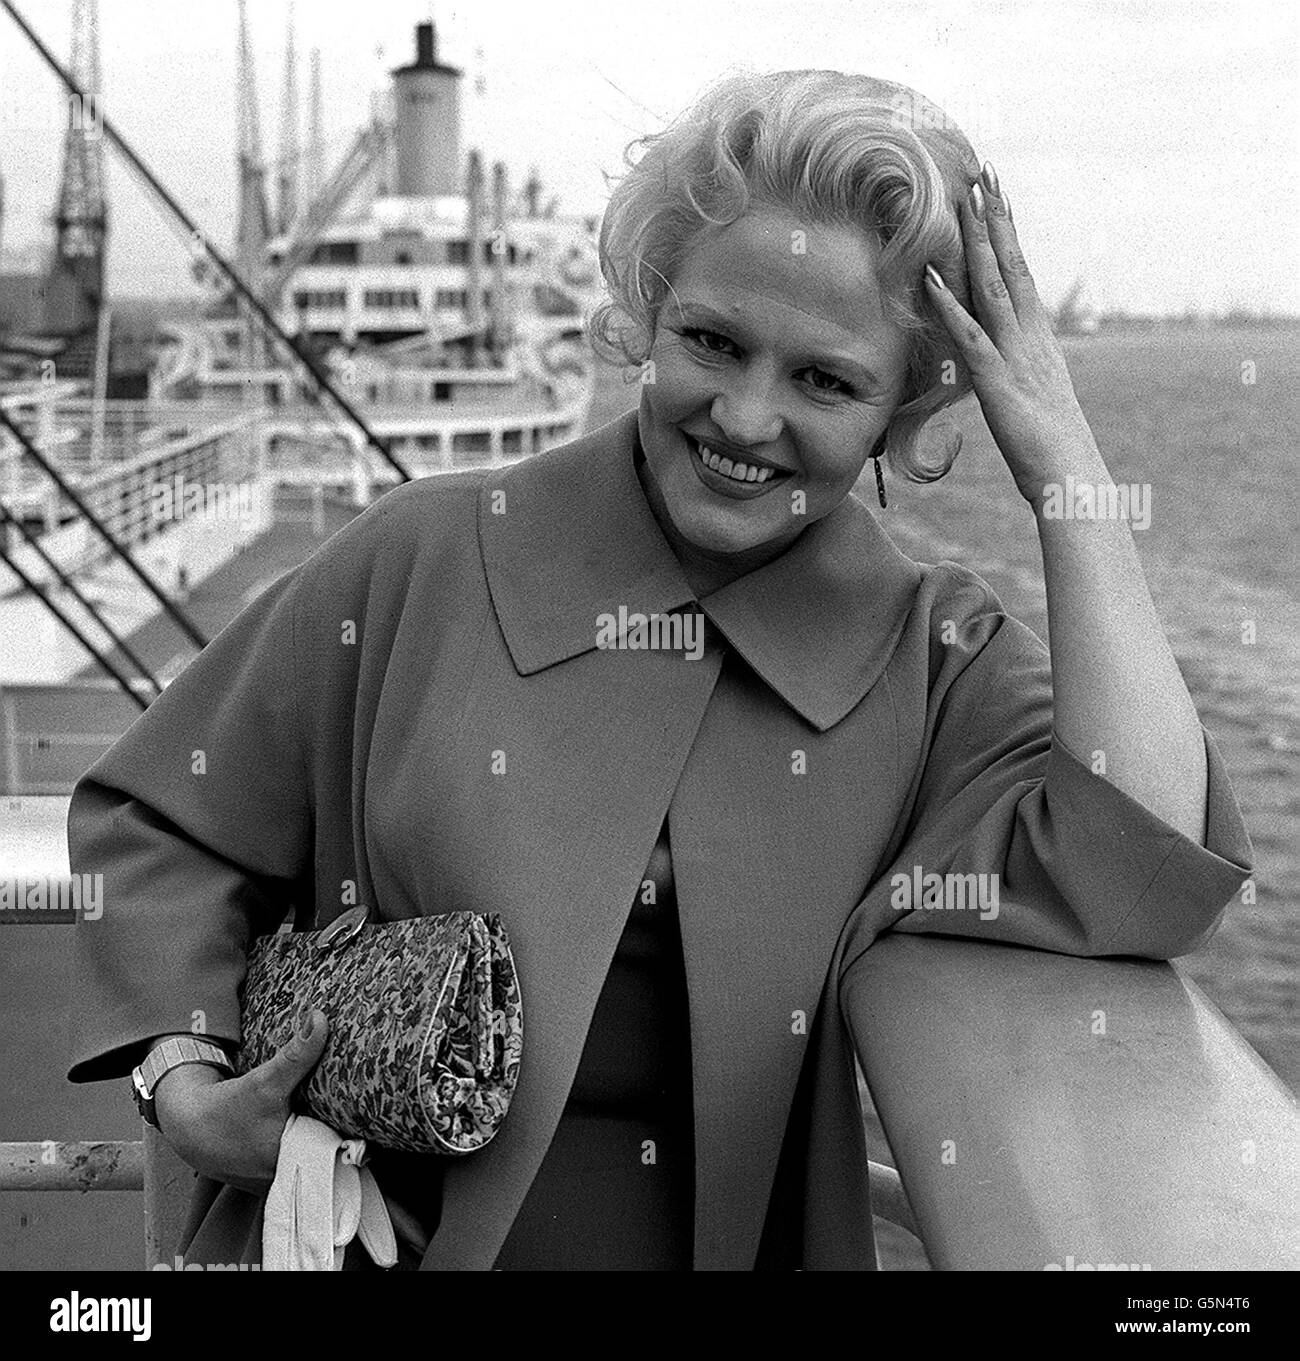 American sining star Peggy Lee as she arrives in Southampton from the USA to begin a three week season at the Pigalle in London. 22/01/02: American singing star Peggy Lee whose smoky voice in such songs as That All There Is? and Fever made her a jazz and pop legend, has died. *... it was announced. Lee died from a heart attack at her home in Bel Air, Los Angeles, said her daughter, Nicki Lee Foster. Lee repeatedly battled injury and ill health, including heart trouble, in order to maintain a career that brought her a Grammy, an Oscar nomination and sold-out houses worldwide. She was 81. Stock Photo